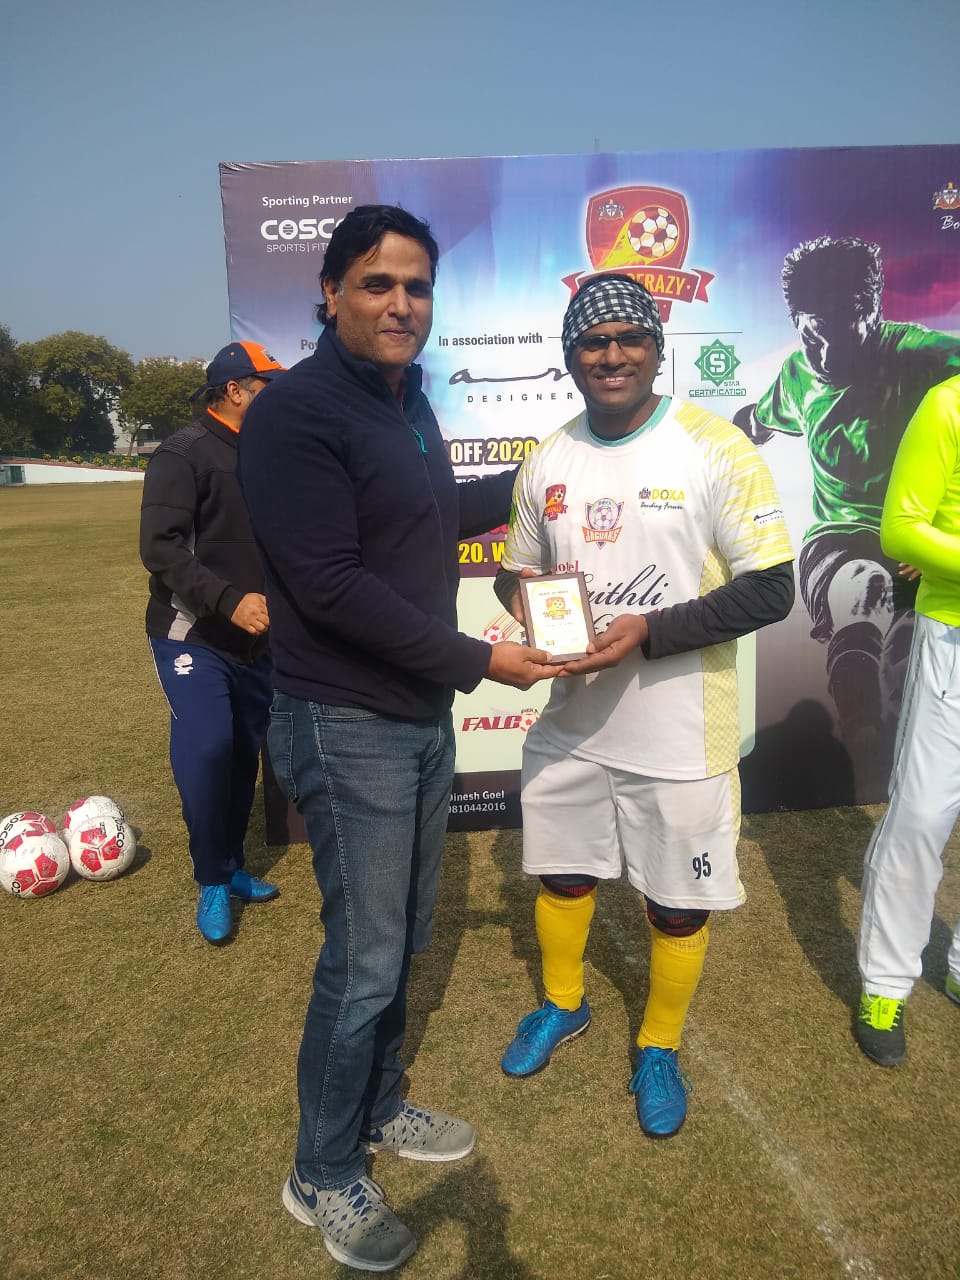 Soccerazy kicks off 4th Edition - Day 3 - 19th Jan, 2020<br>
<br>
Day 3 of the action packed league..<br>
<br>
Guaranteed excitement on & off the field!